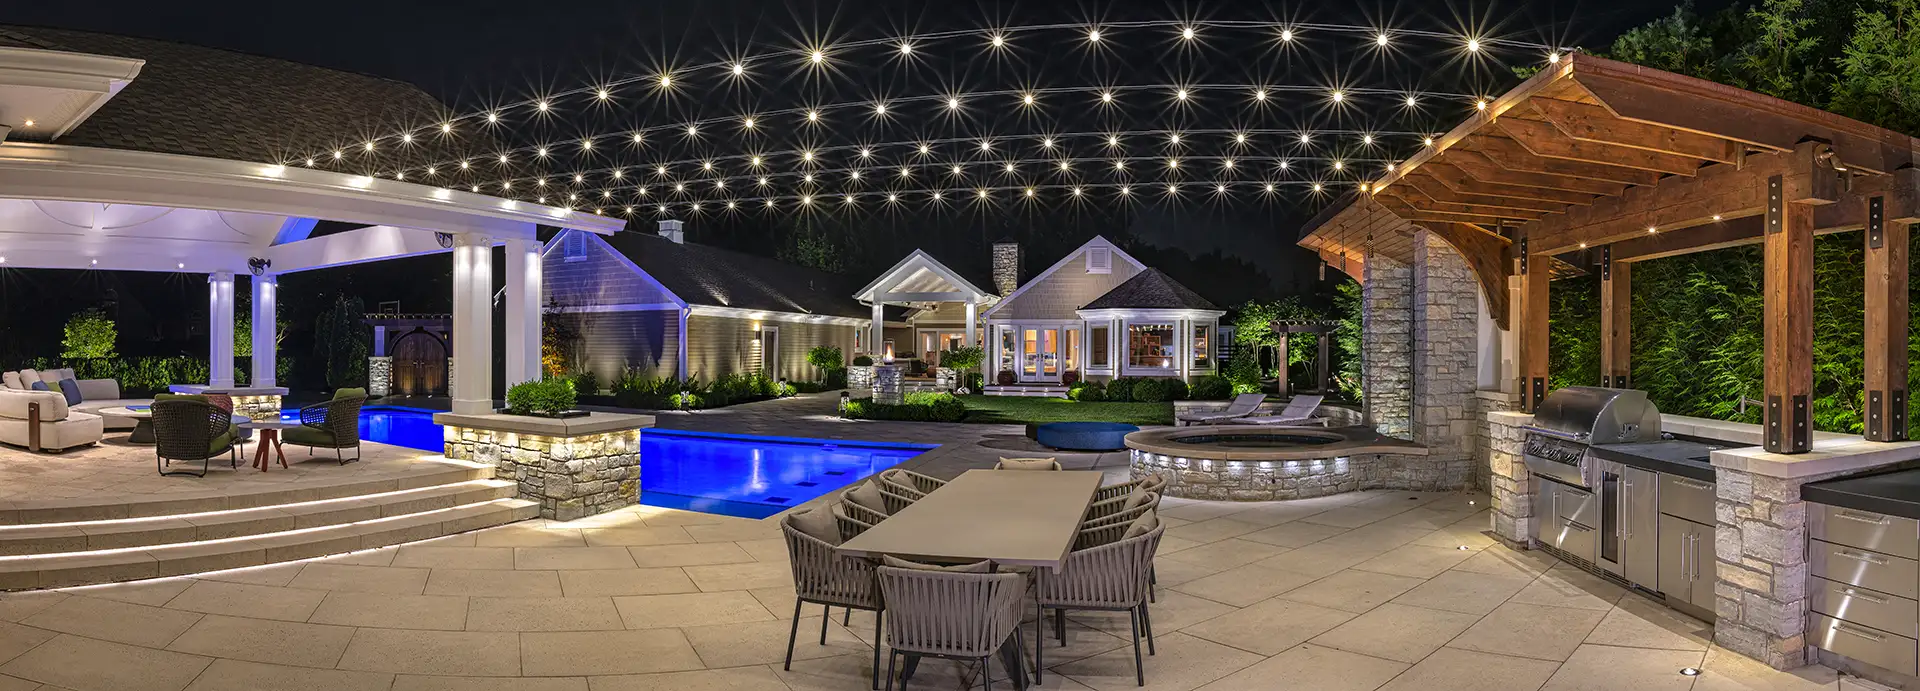 Victory Lane image 7 pool outdoor kitchen porch dining area Lighthouse Outdoor Lighting and Audio OH Columbus Cincinnati Dayton